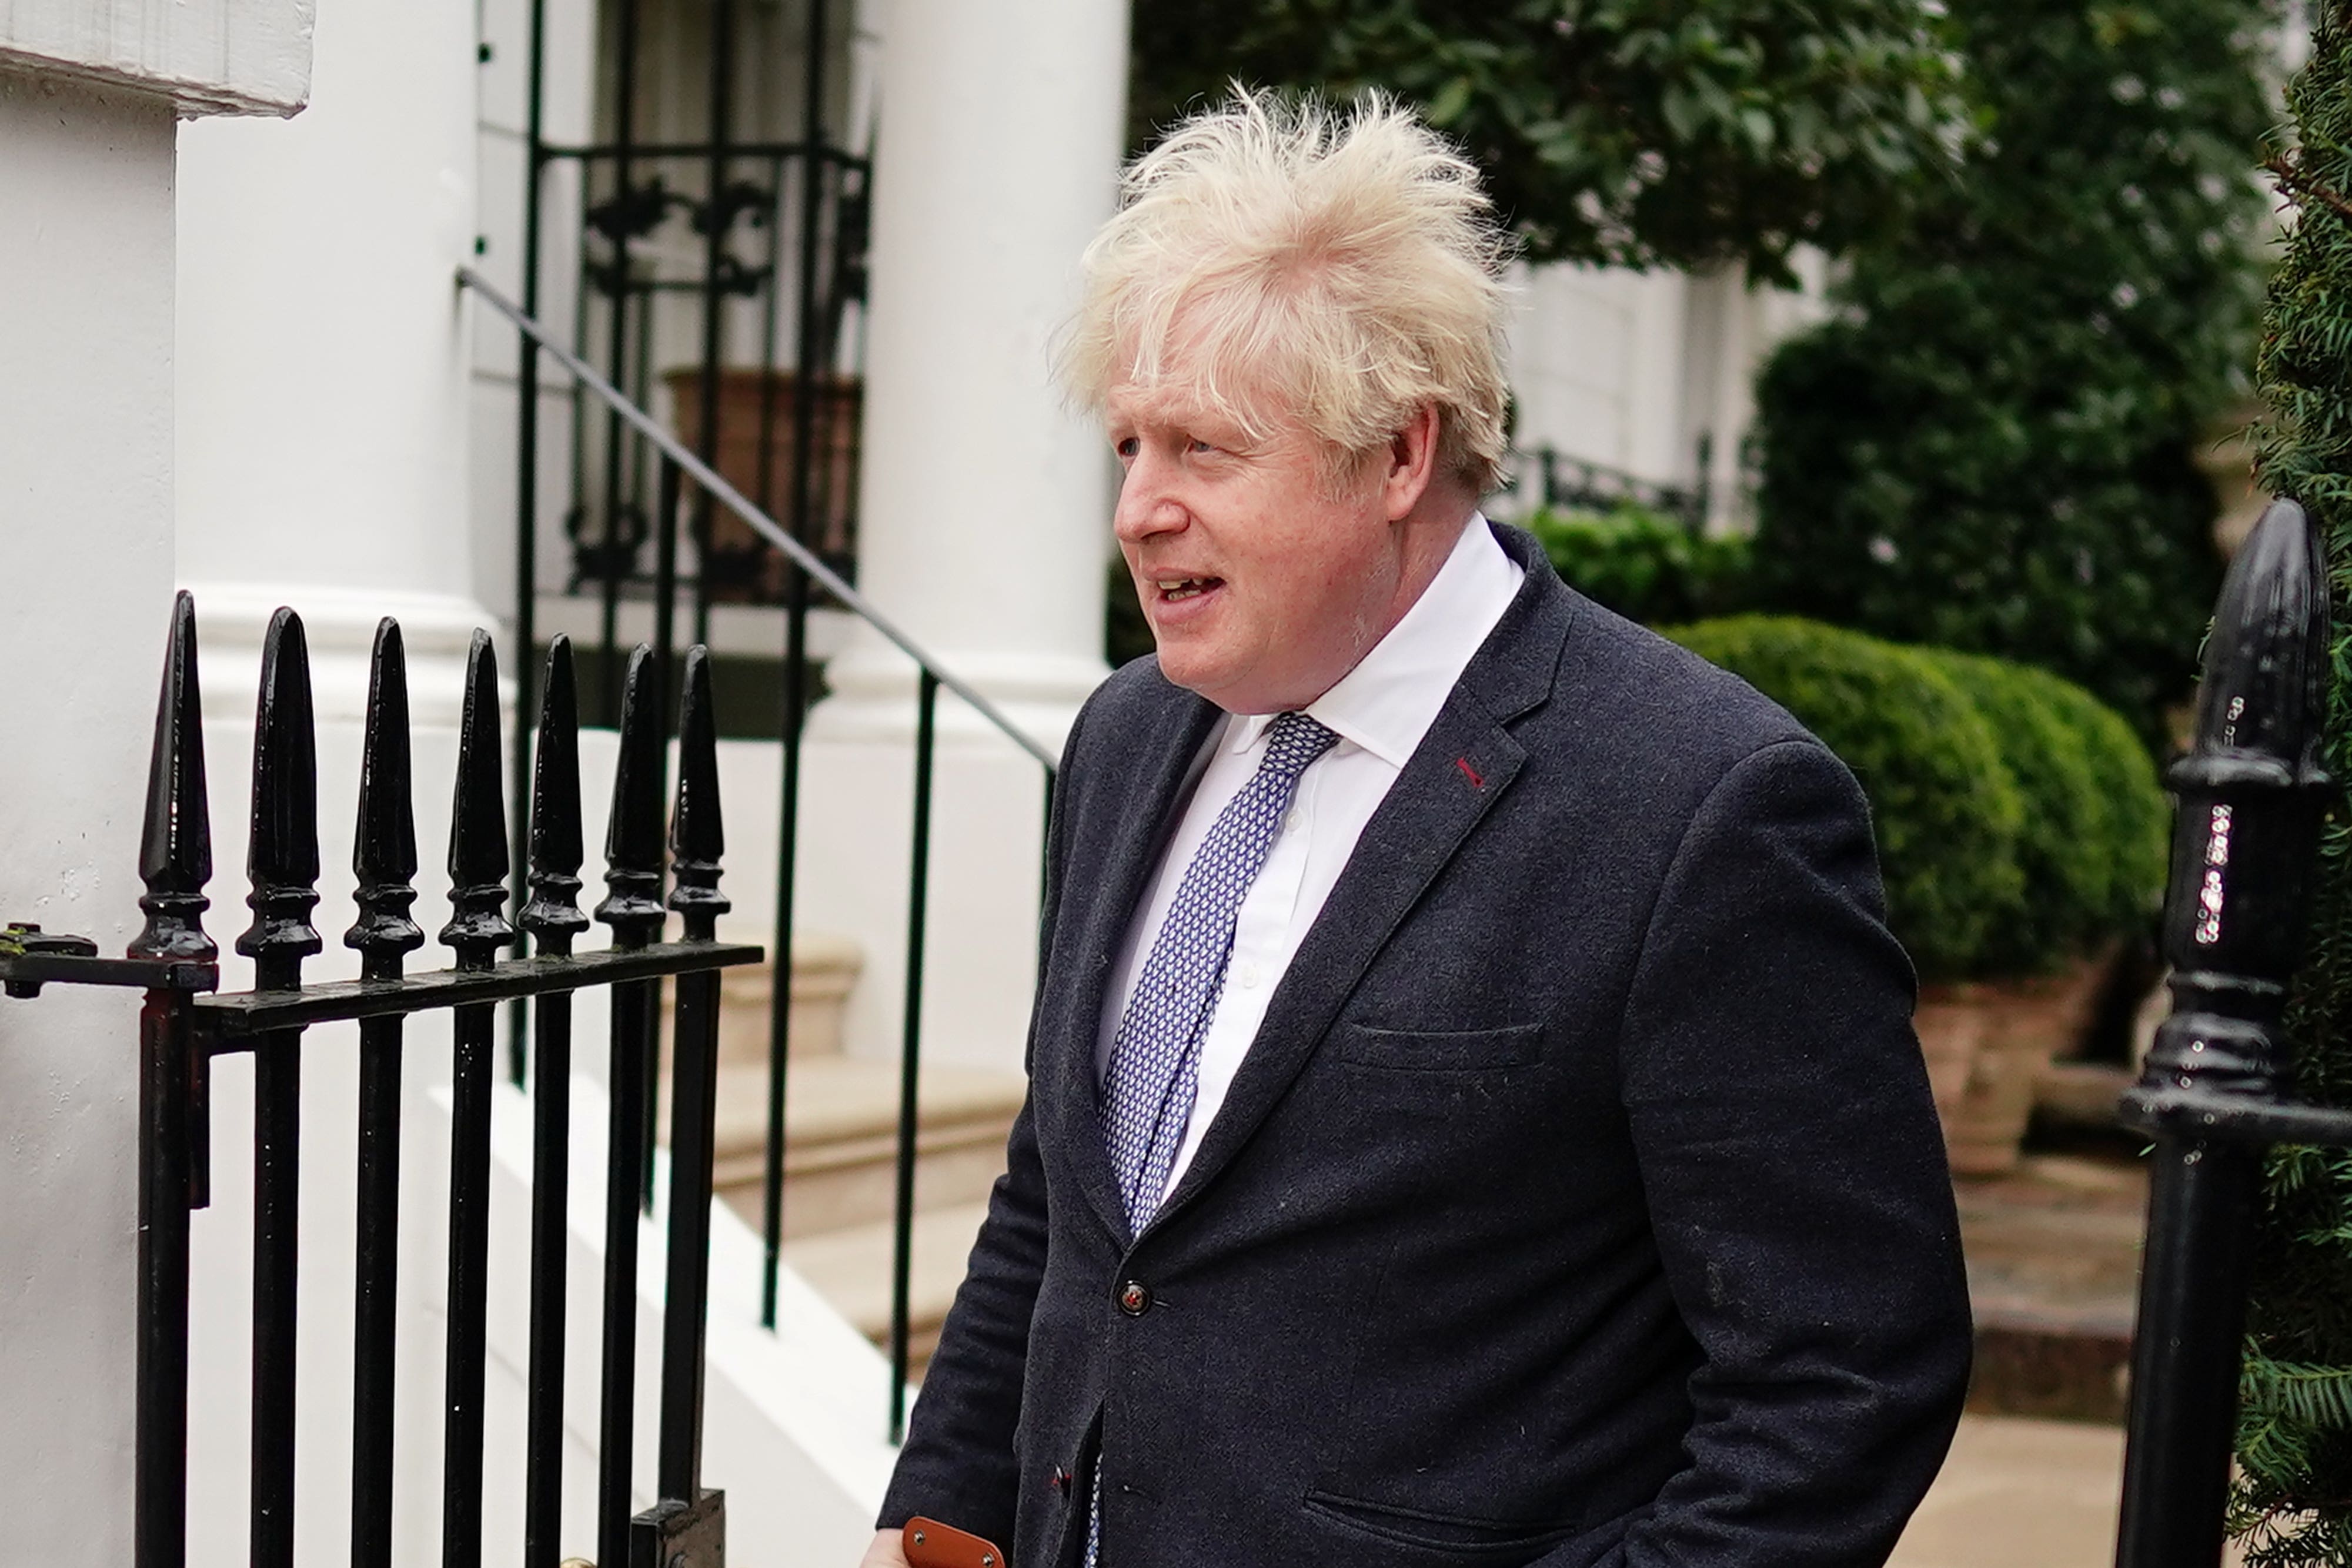 The former prime minister Boris Johnson leaves his home in London on Tuesday